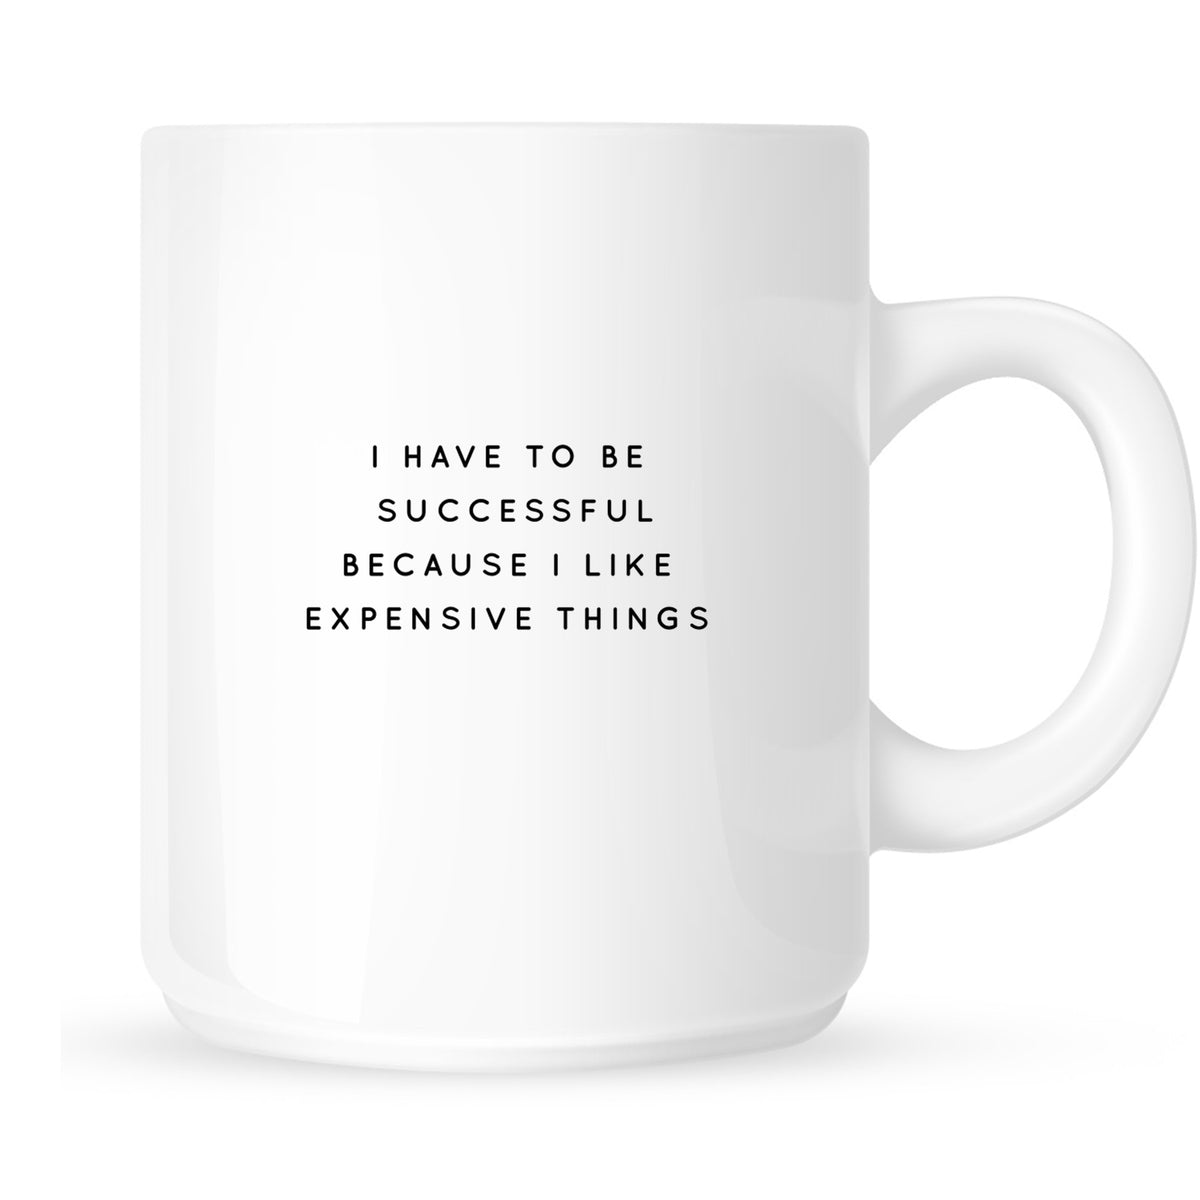 Mug - I Have to Be Successful Because I Like Expensive Things